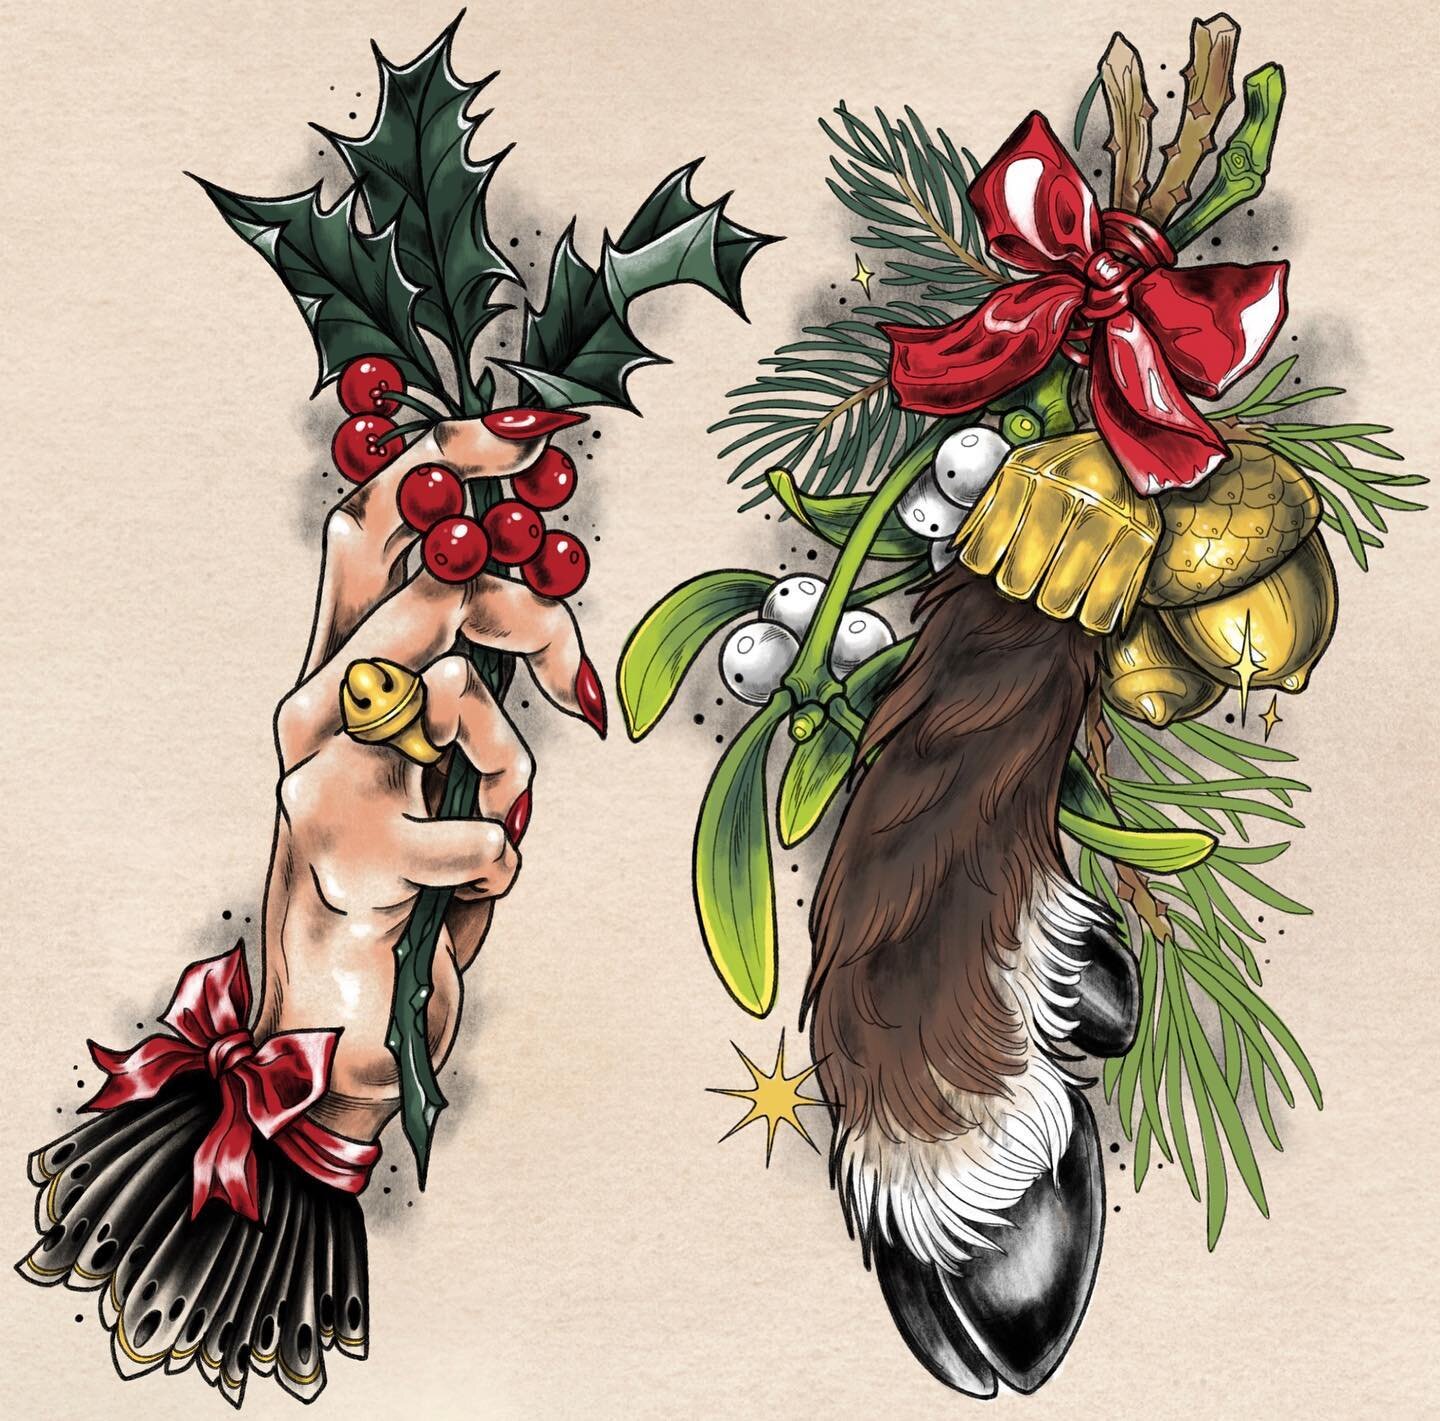 🎄Available 🎄
@rachelmontetattoo has a couple of holiday themed pieces ready to be tattooed!
She&rsquo;s offering these at a discounted rate ($140/hr) if you get either of them tattooed before December 24th!
-
Colour is preferred, and they&rsquo;ll 